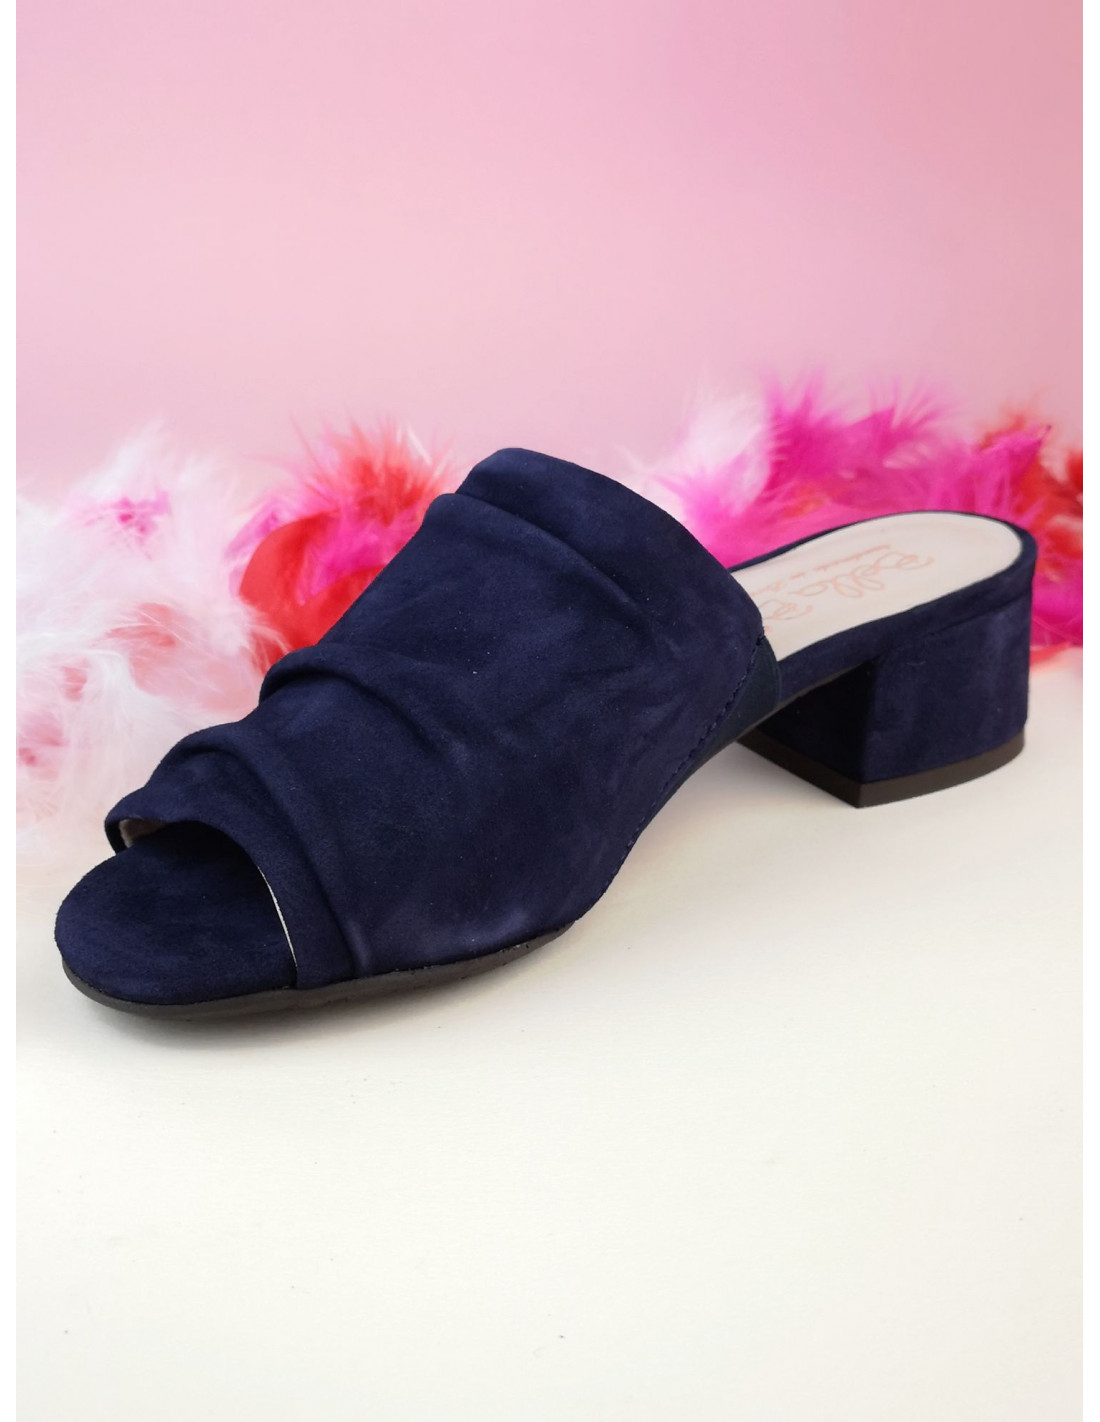 Mules with small square heels, navy blue suede, Fix, Bella B